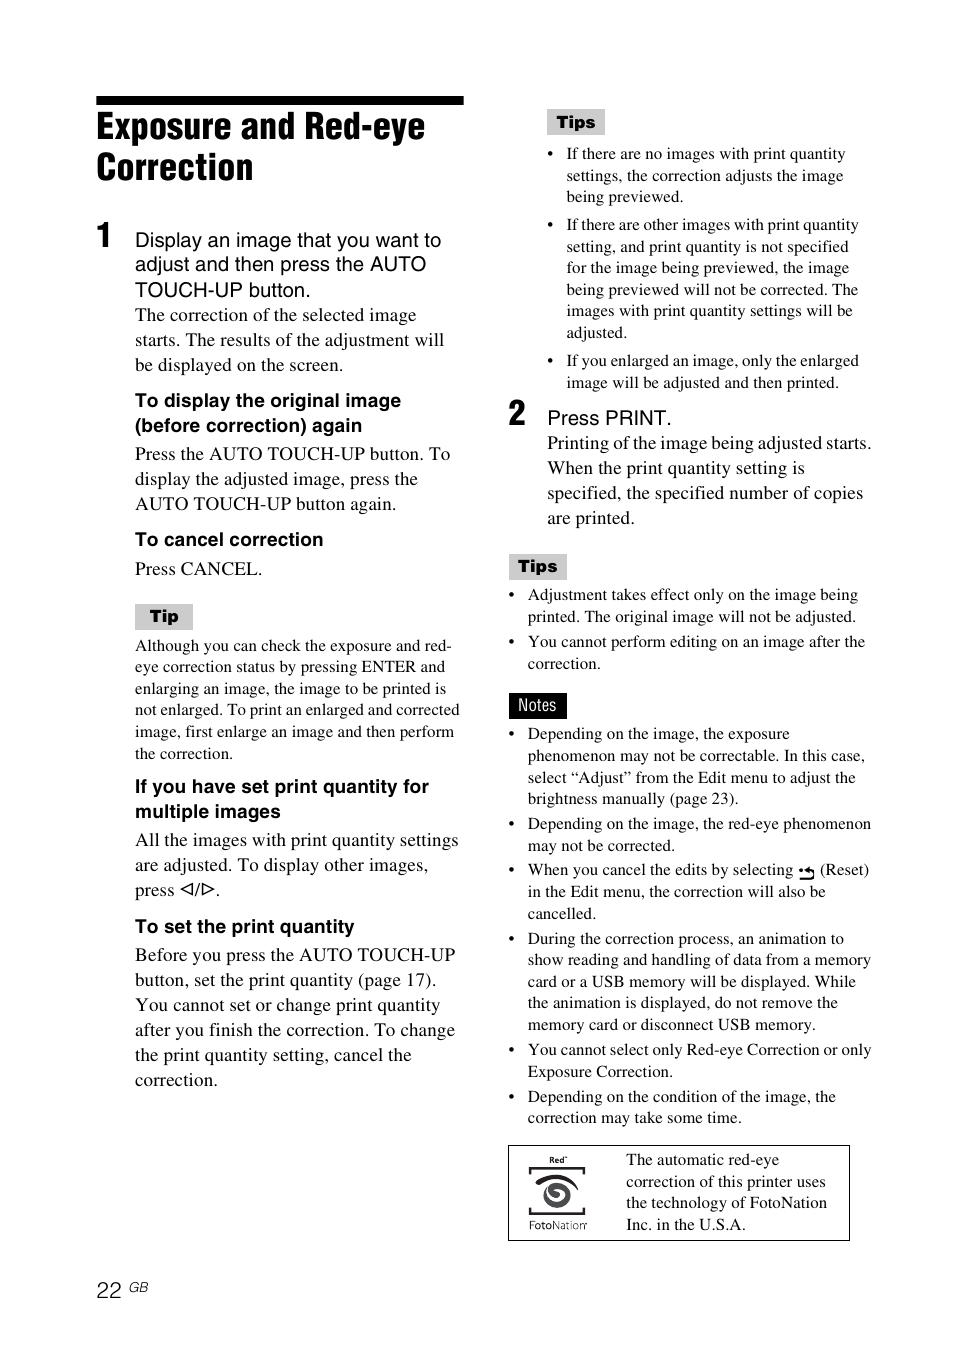 Exposure and red-eye correction | Sony DPP-FP77 User Manual | Page 22 / 72